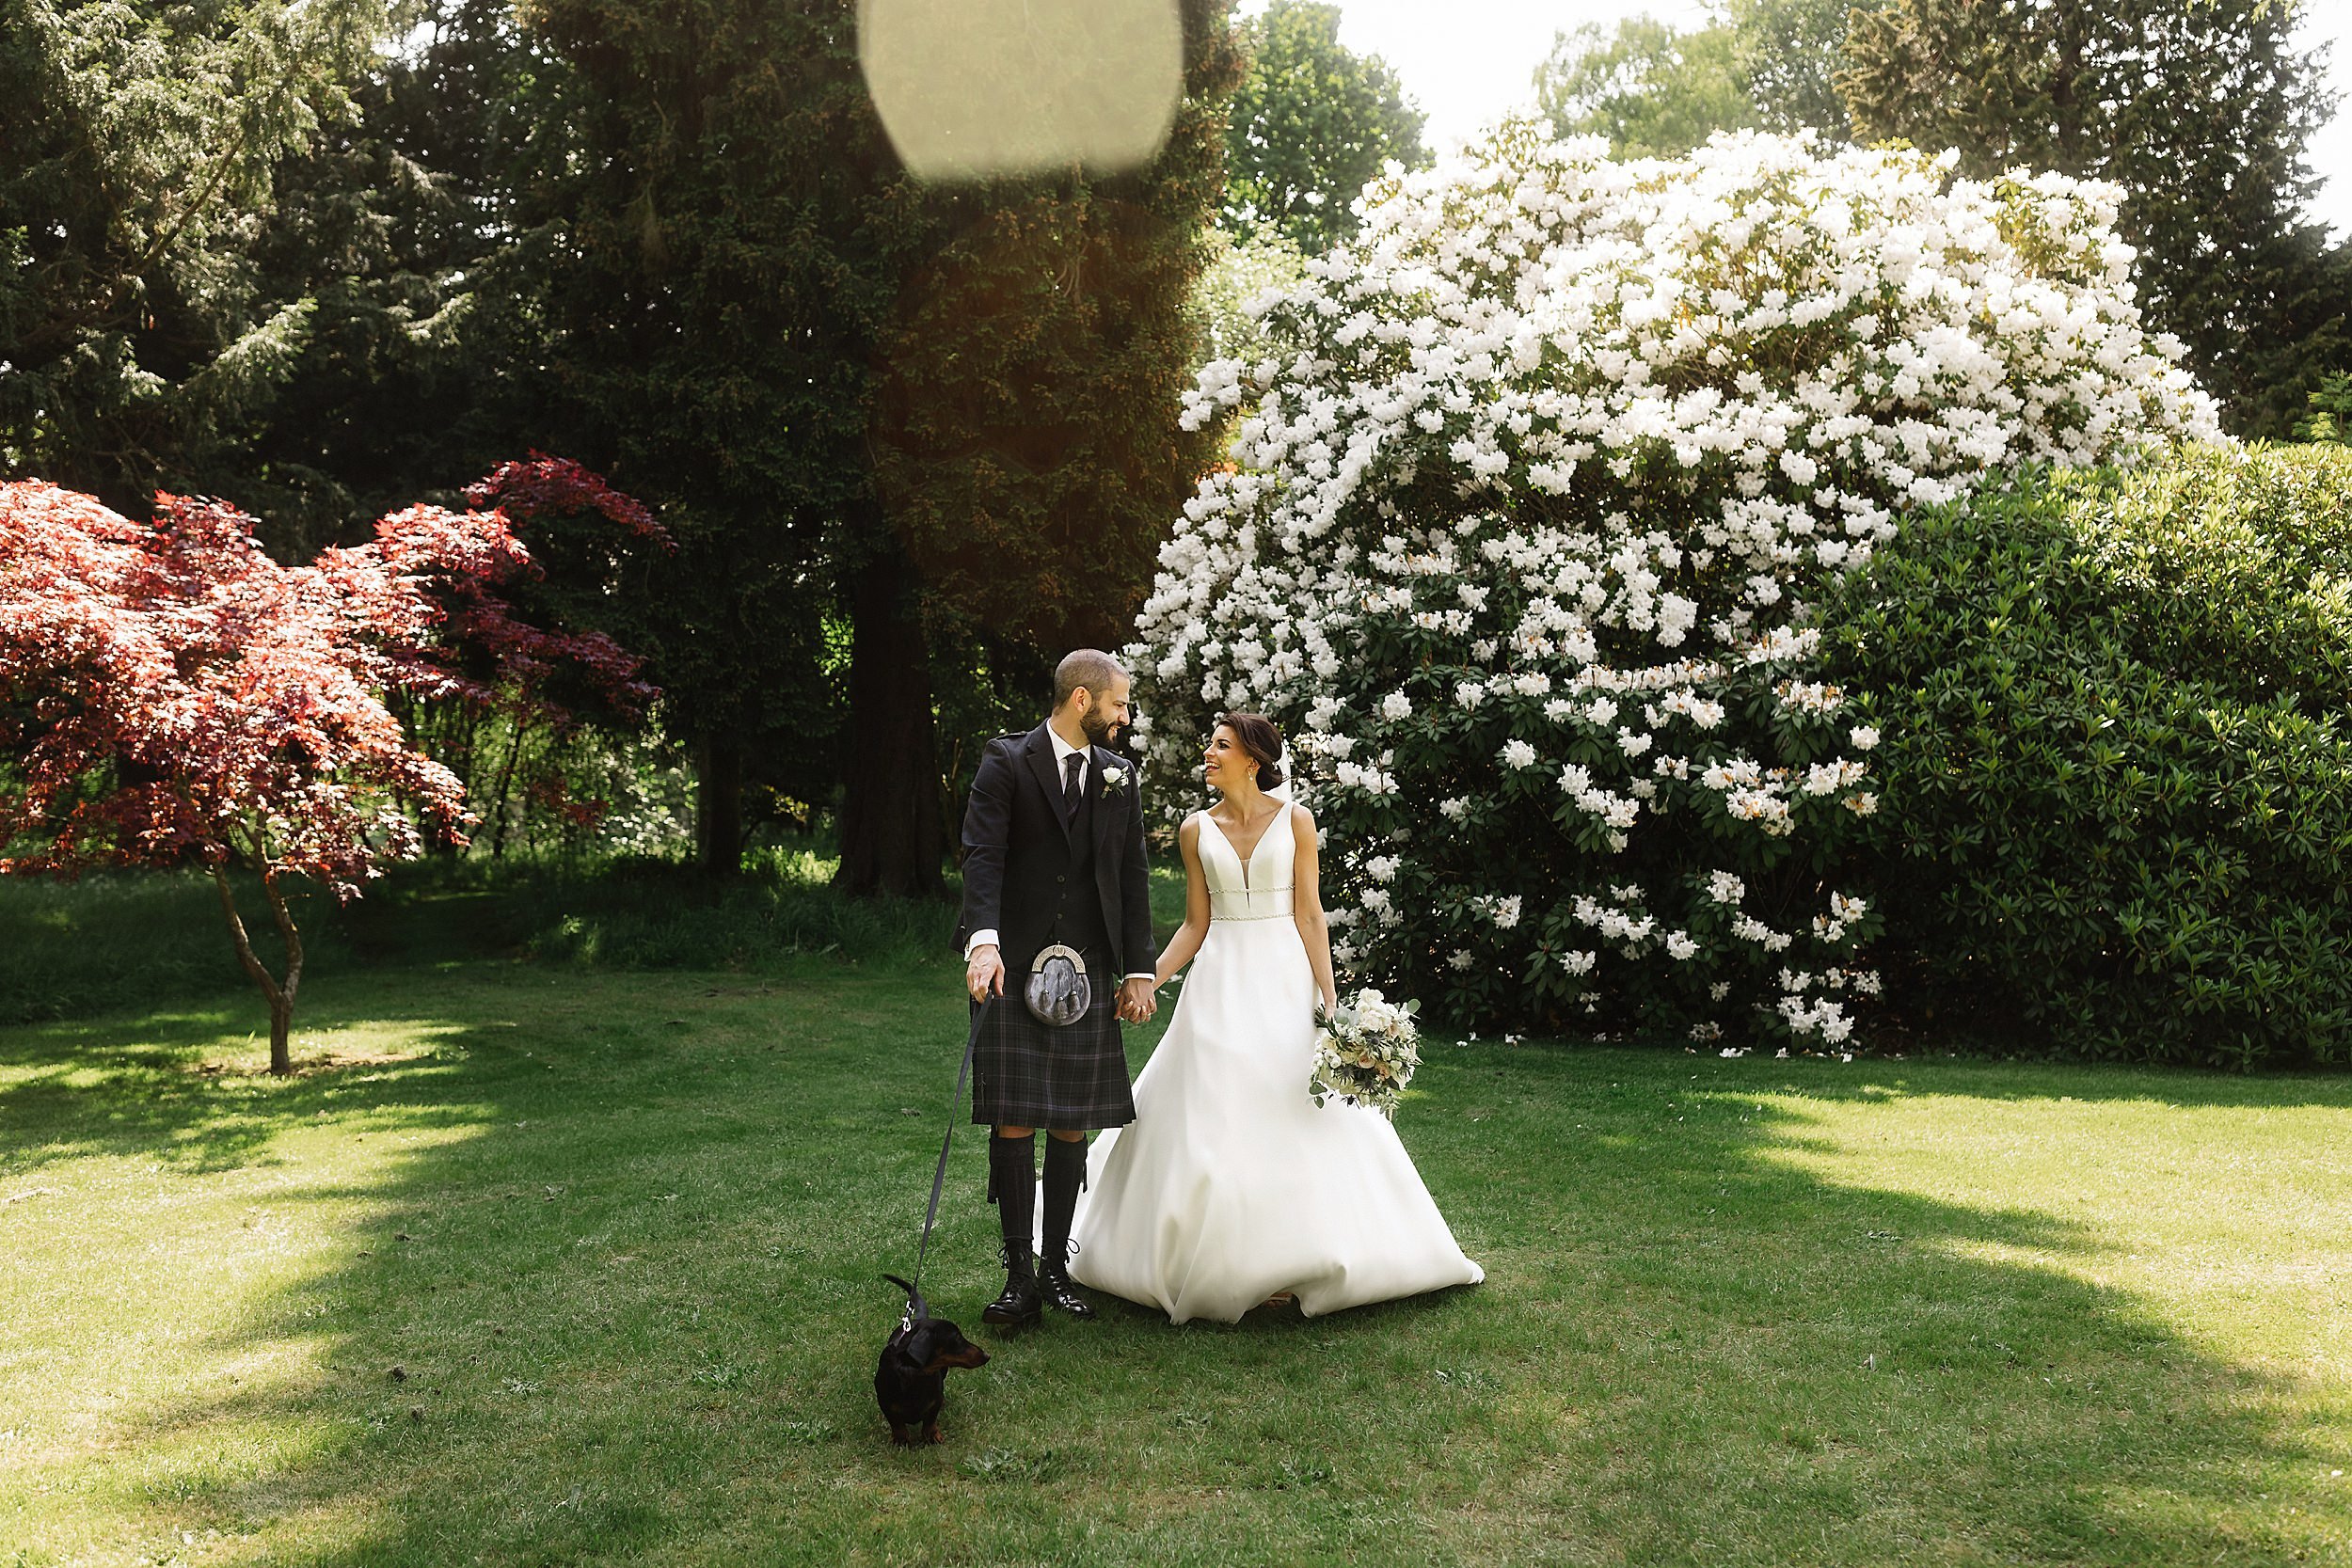 the bride and groom pose with their miniature daschund in the gardens of errol park wedding venue trees and flowering shrubs are visible in the background